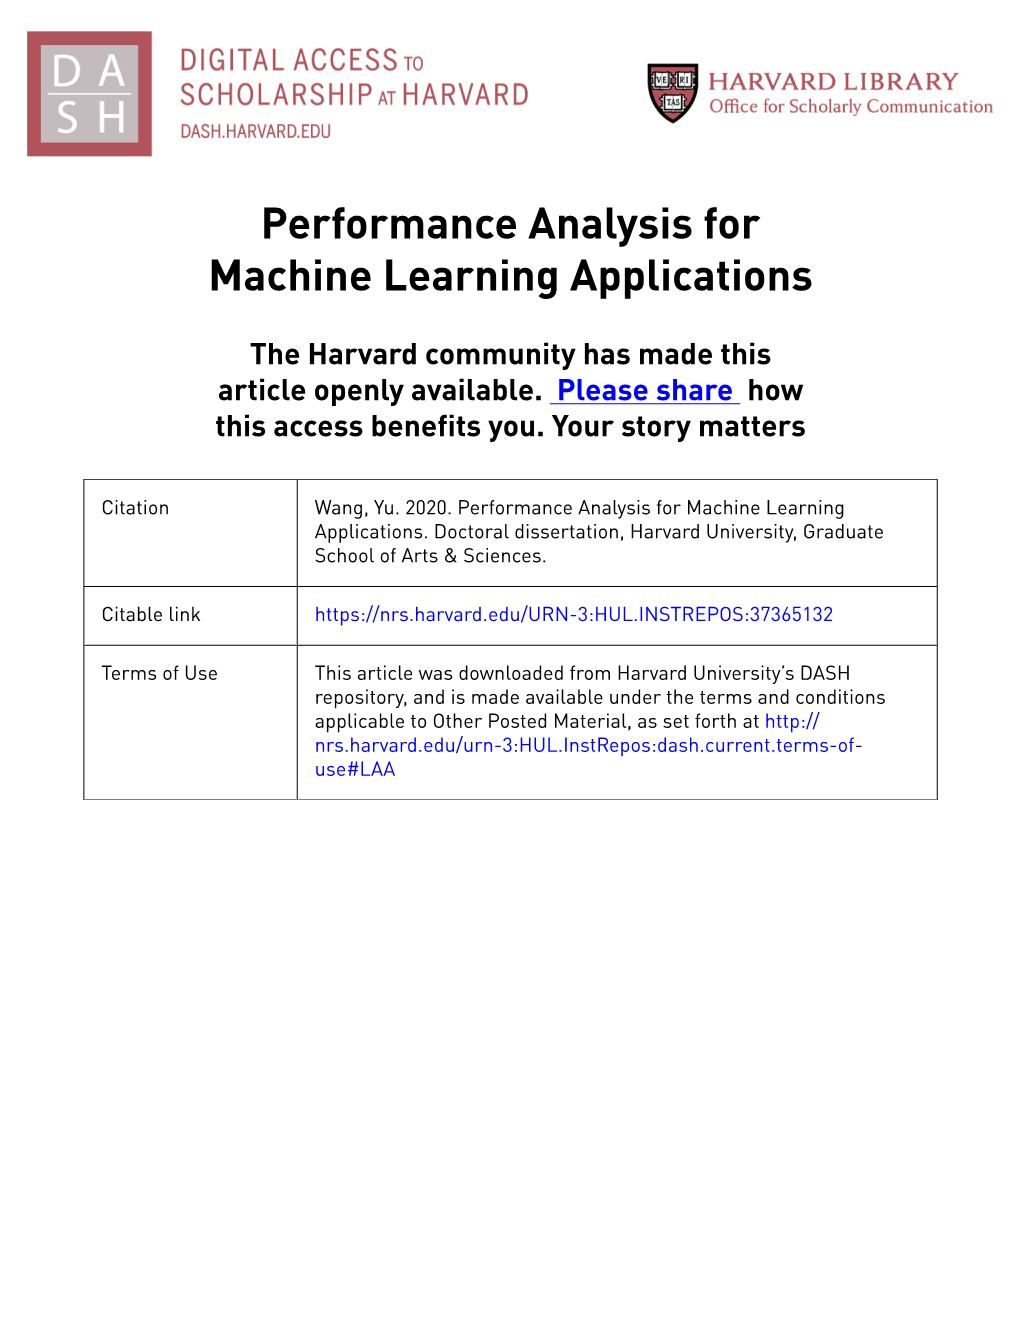 Performance Analysis for Machine Learning Applications